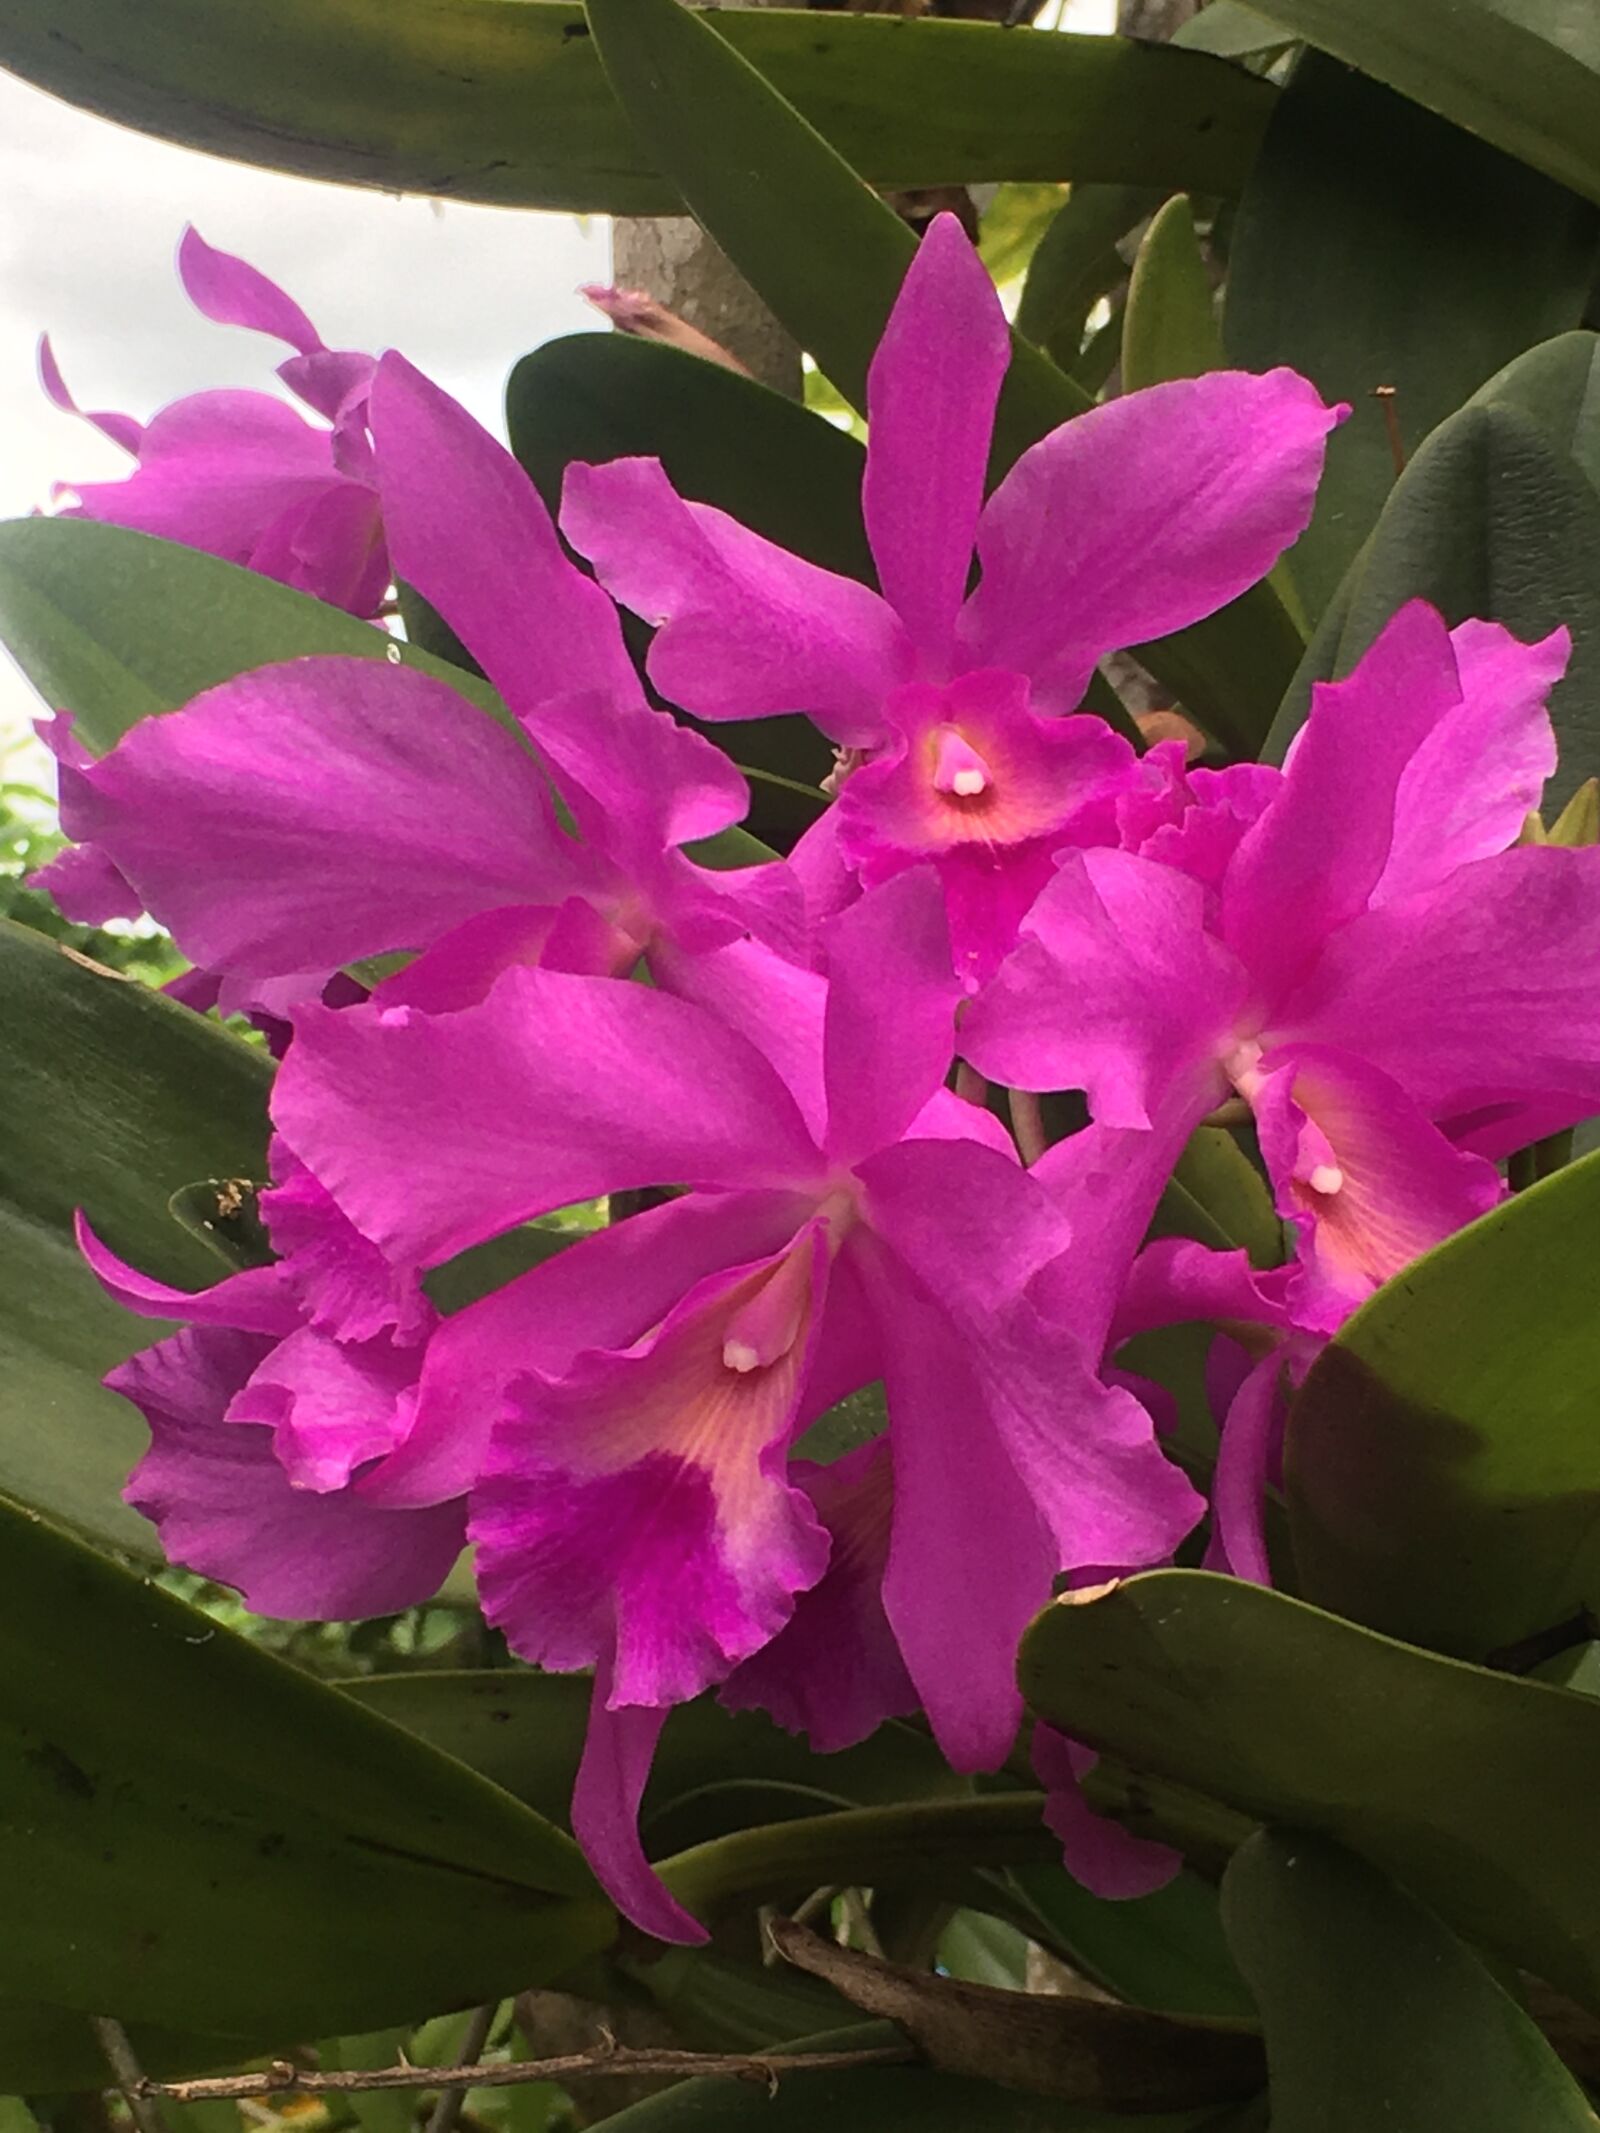 Apple iPhone 6s Plus + iPhone 6s Plus back camera 4.15mm f/2.2 sample photo. Vanda orchids, green leaves photography